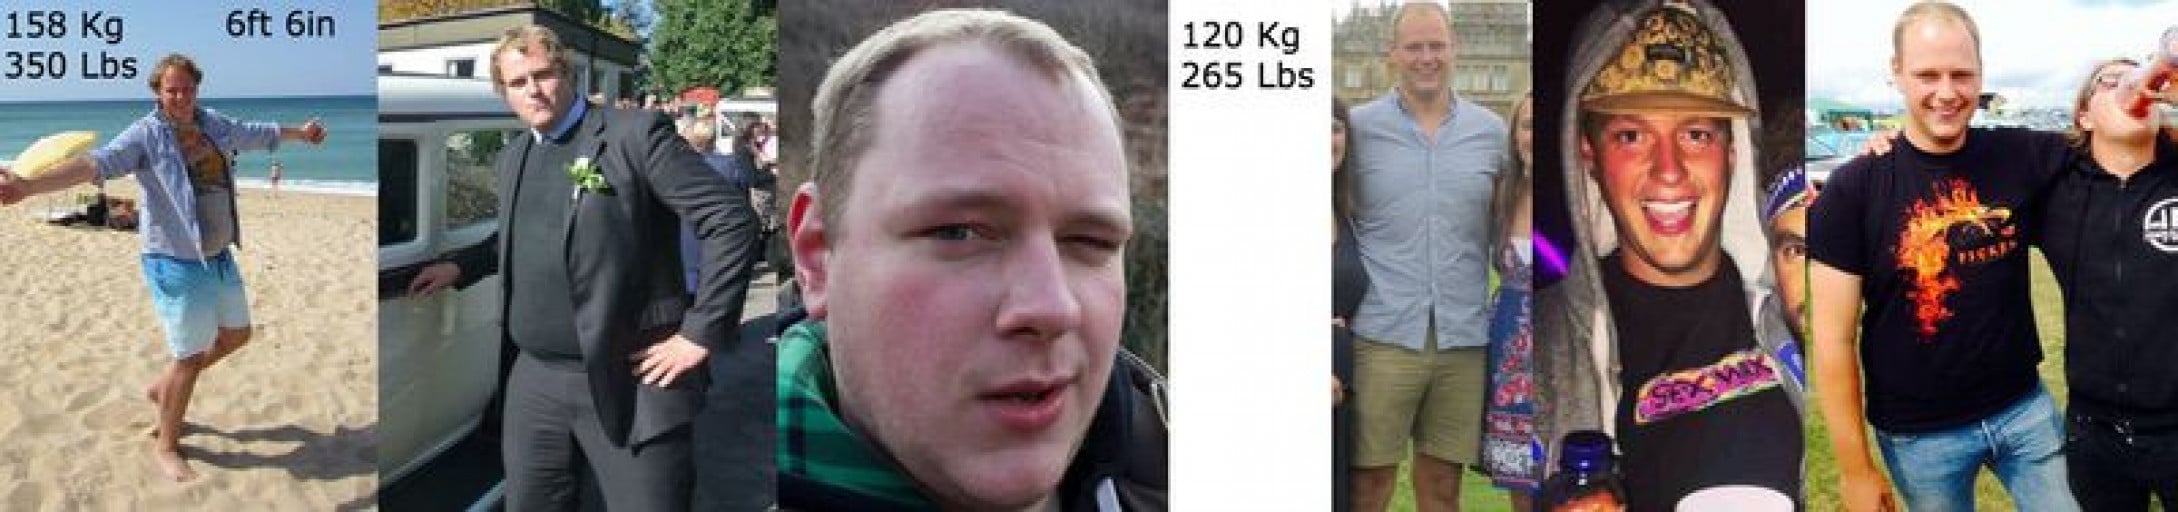 A photo of a 6'6" man showing a weight cut from 350 pounds to 265 pounds. A total loss of 85 pounds.